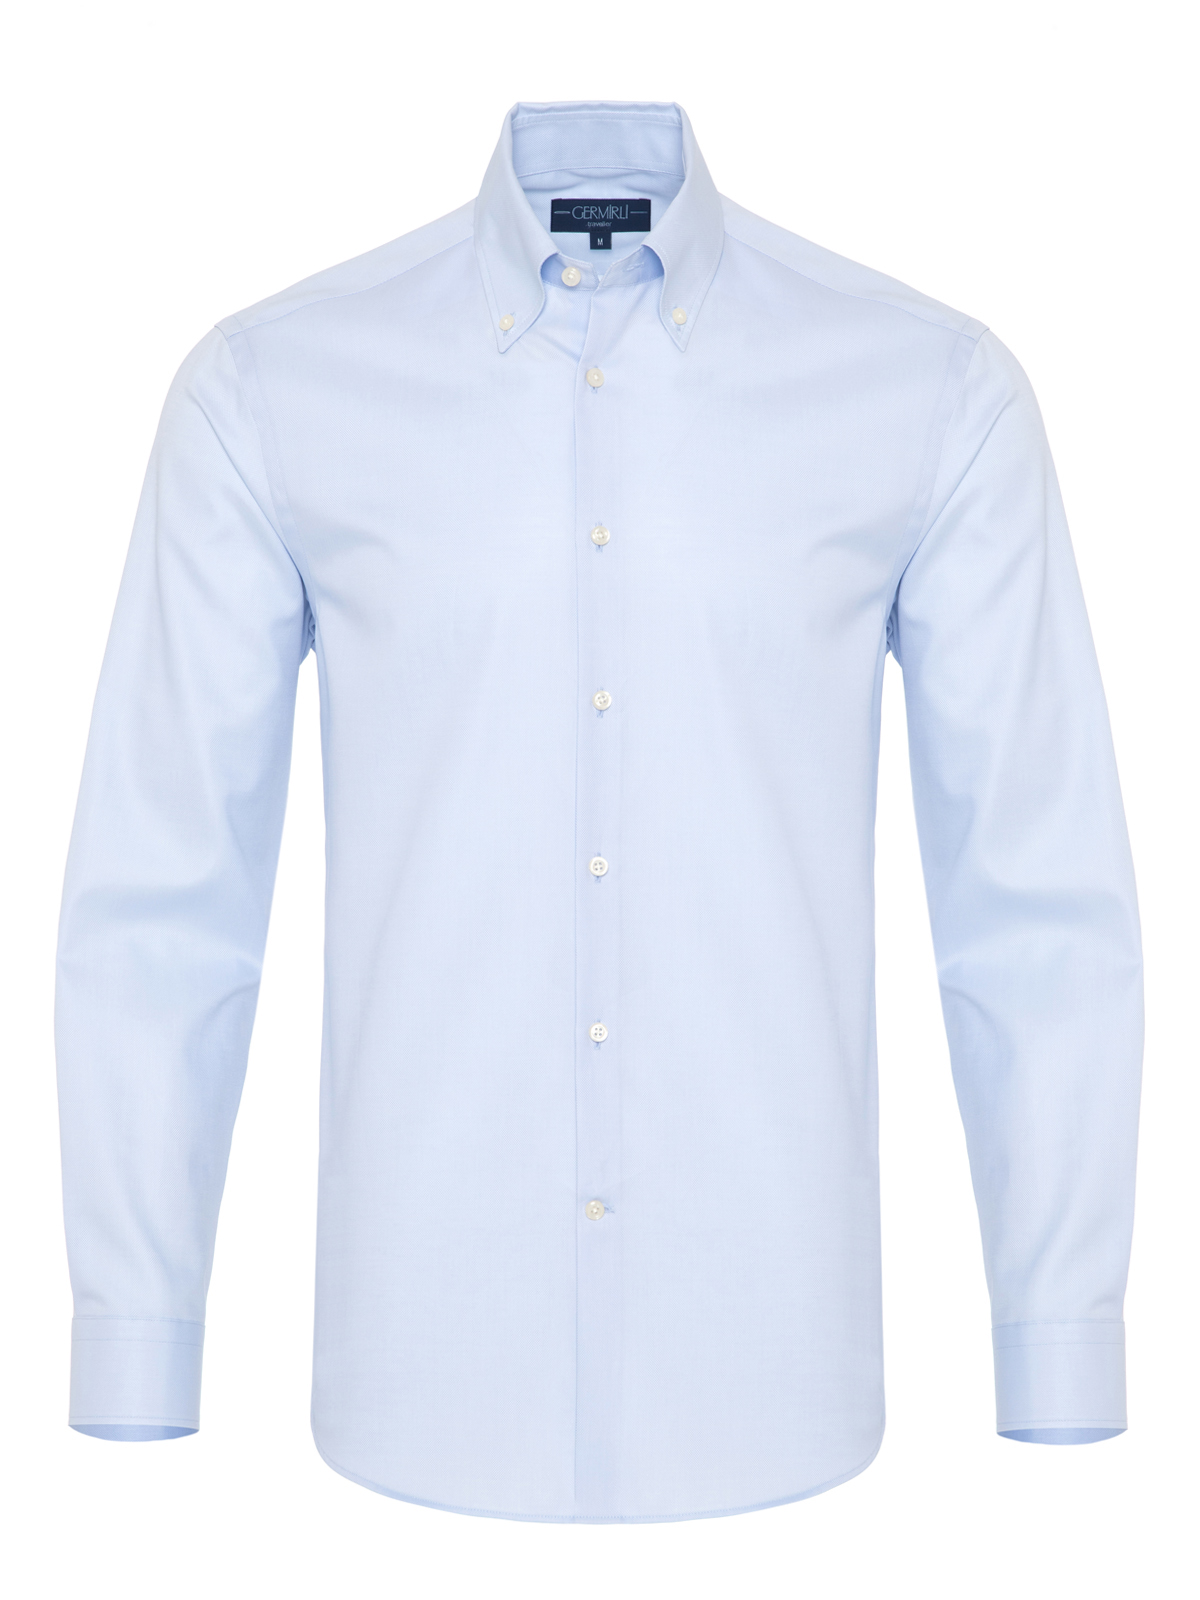 Germirli - Germirli X-Thermotech Blue Oxford Button Down Tailor Fit Shirt